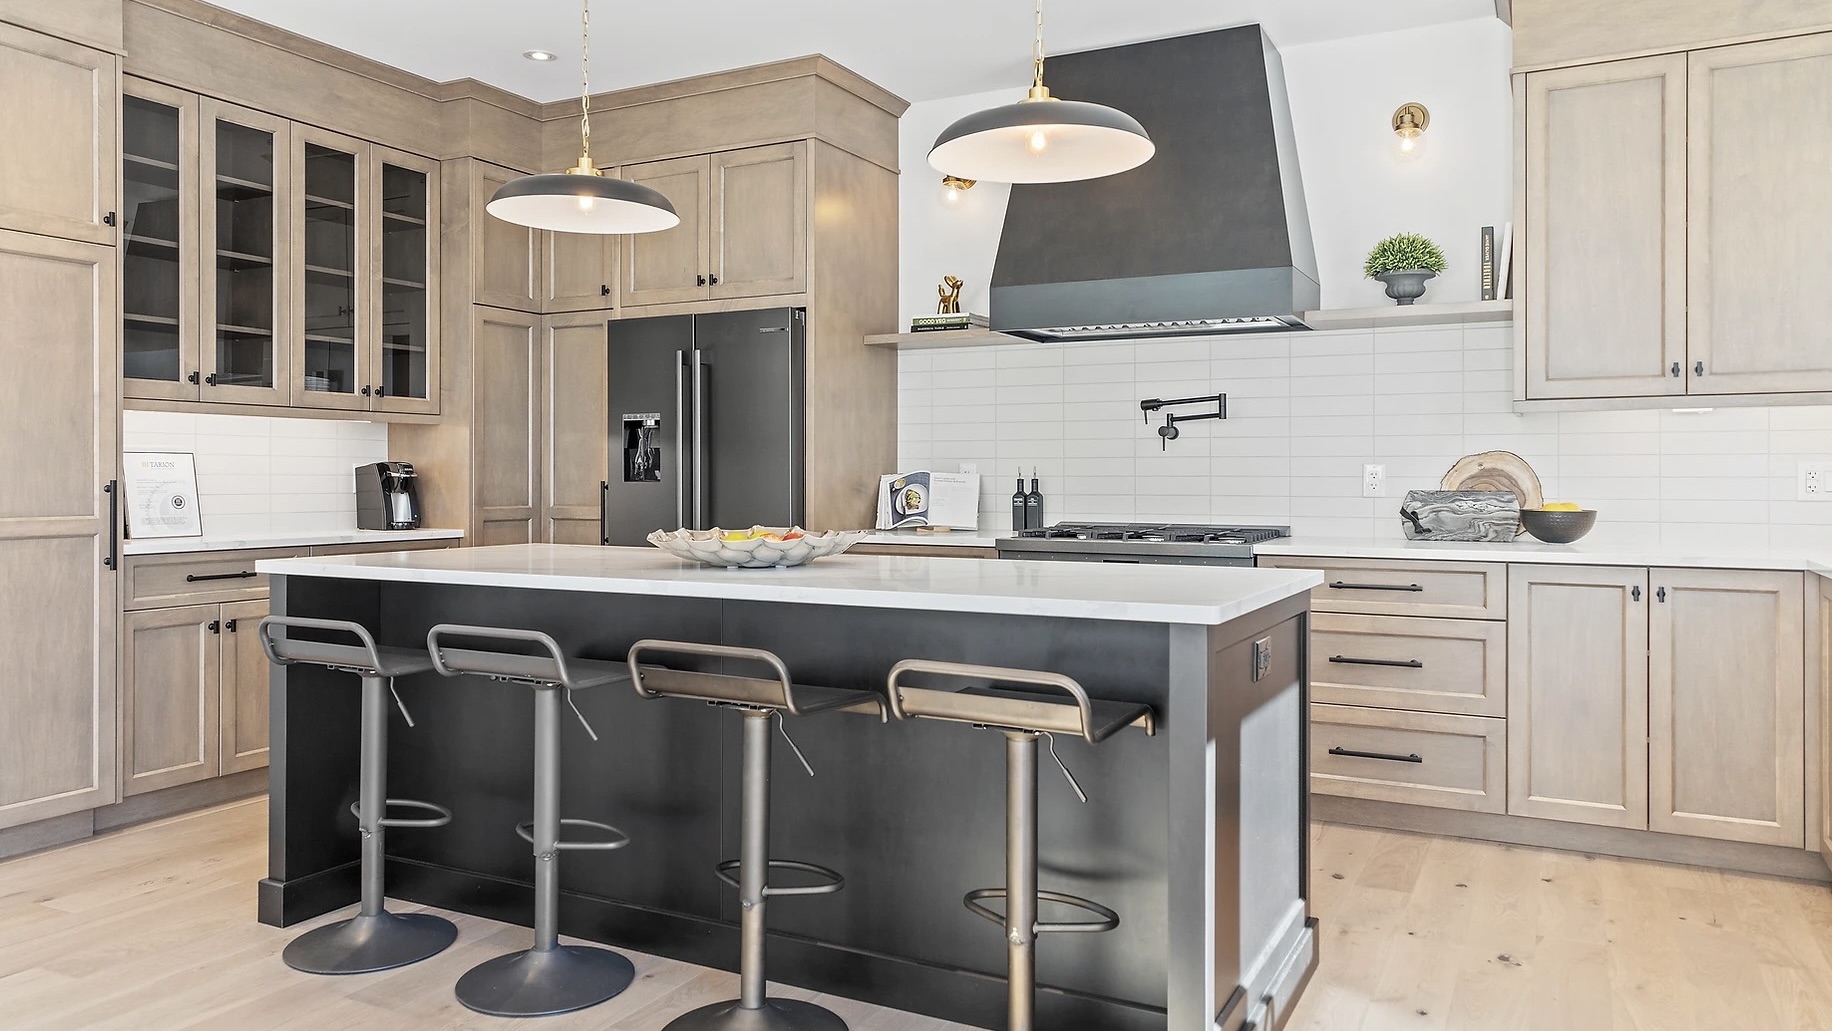 Kitchen at 1905 Lakeshore luxury home for sale in Niagara-on-the-Lake